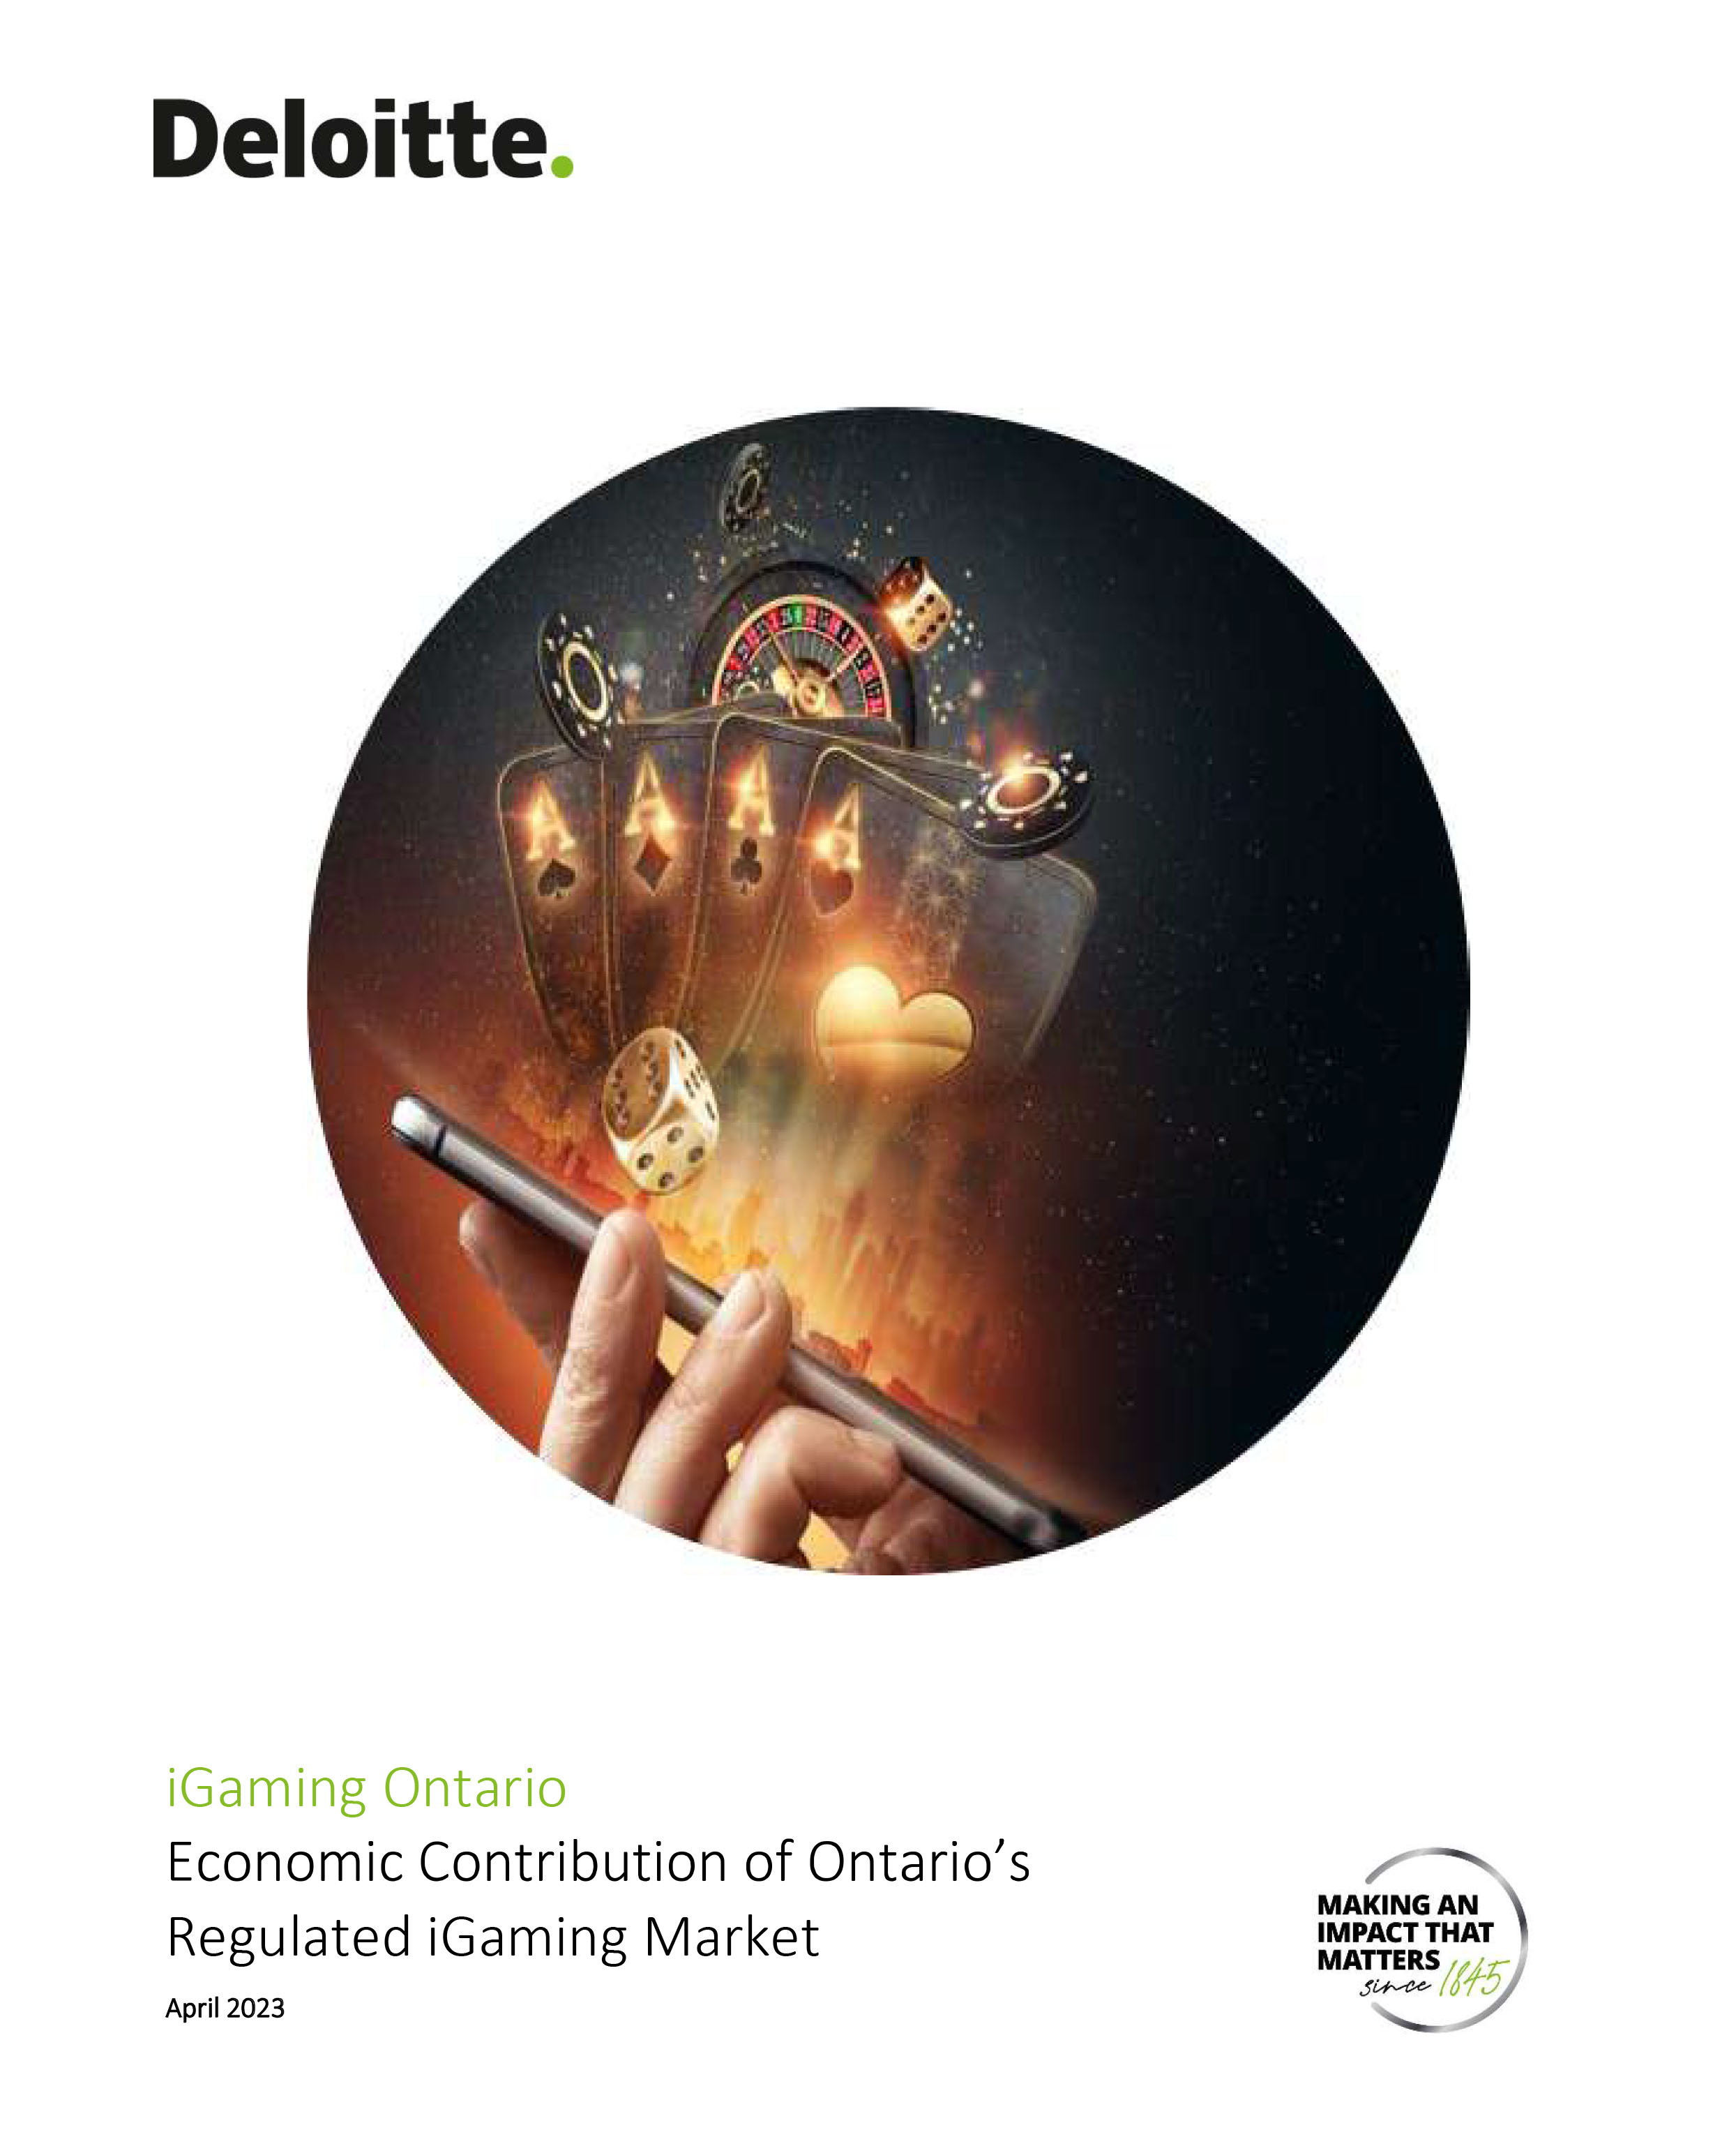 Deloitte: Economic Contribution of Ontario's Regulated iGaming Market